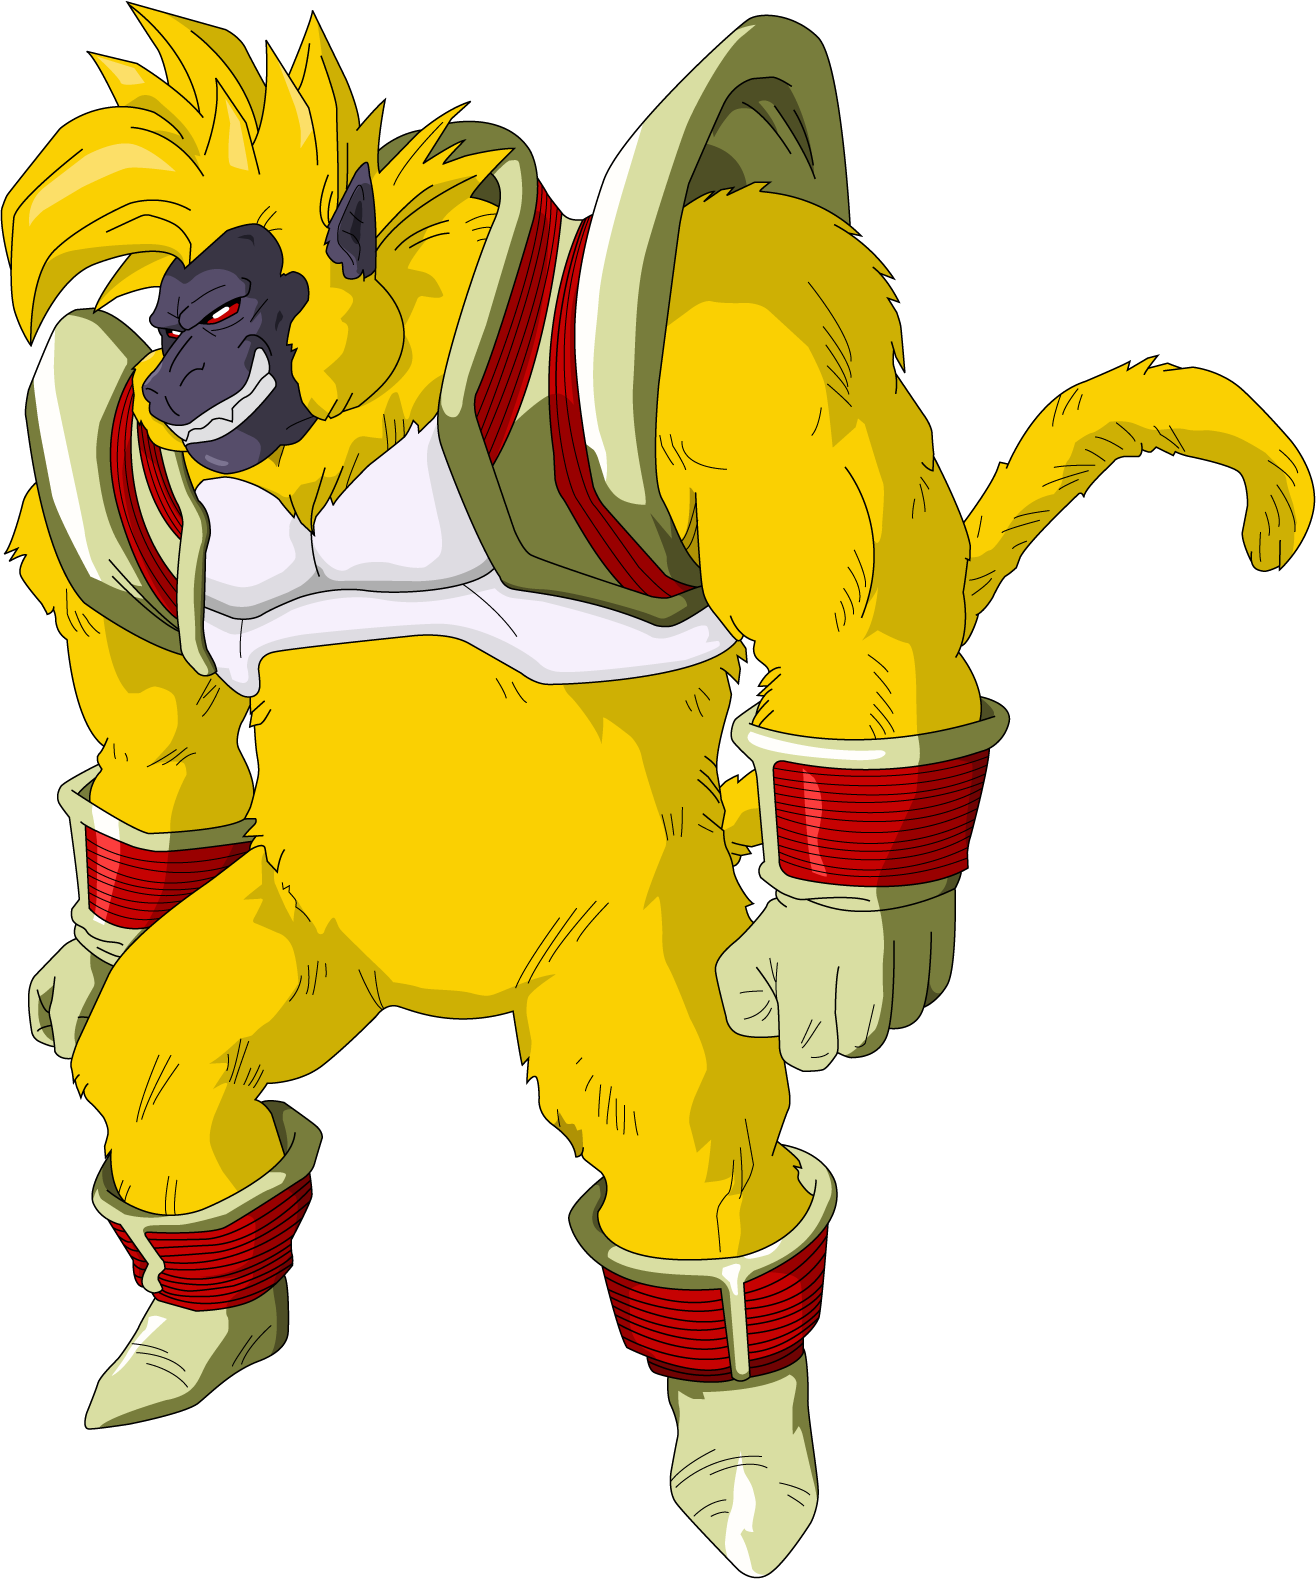 Image - Golden Great Ape Baby.png | Dragon Ball Power Levels Wiki | Fandom powered by Wikia